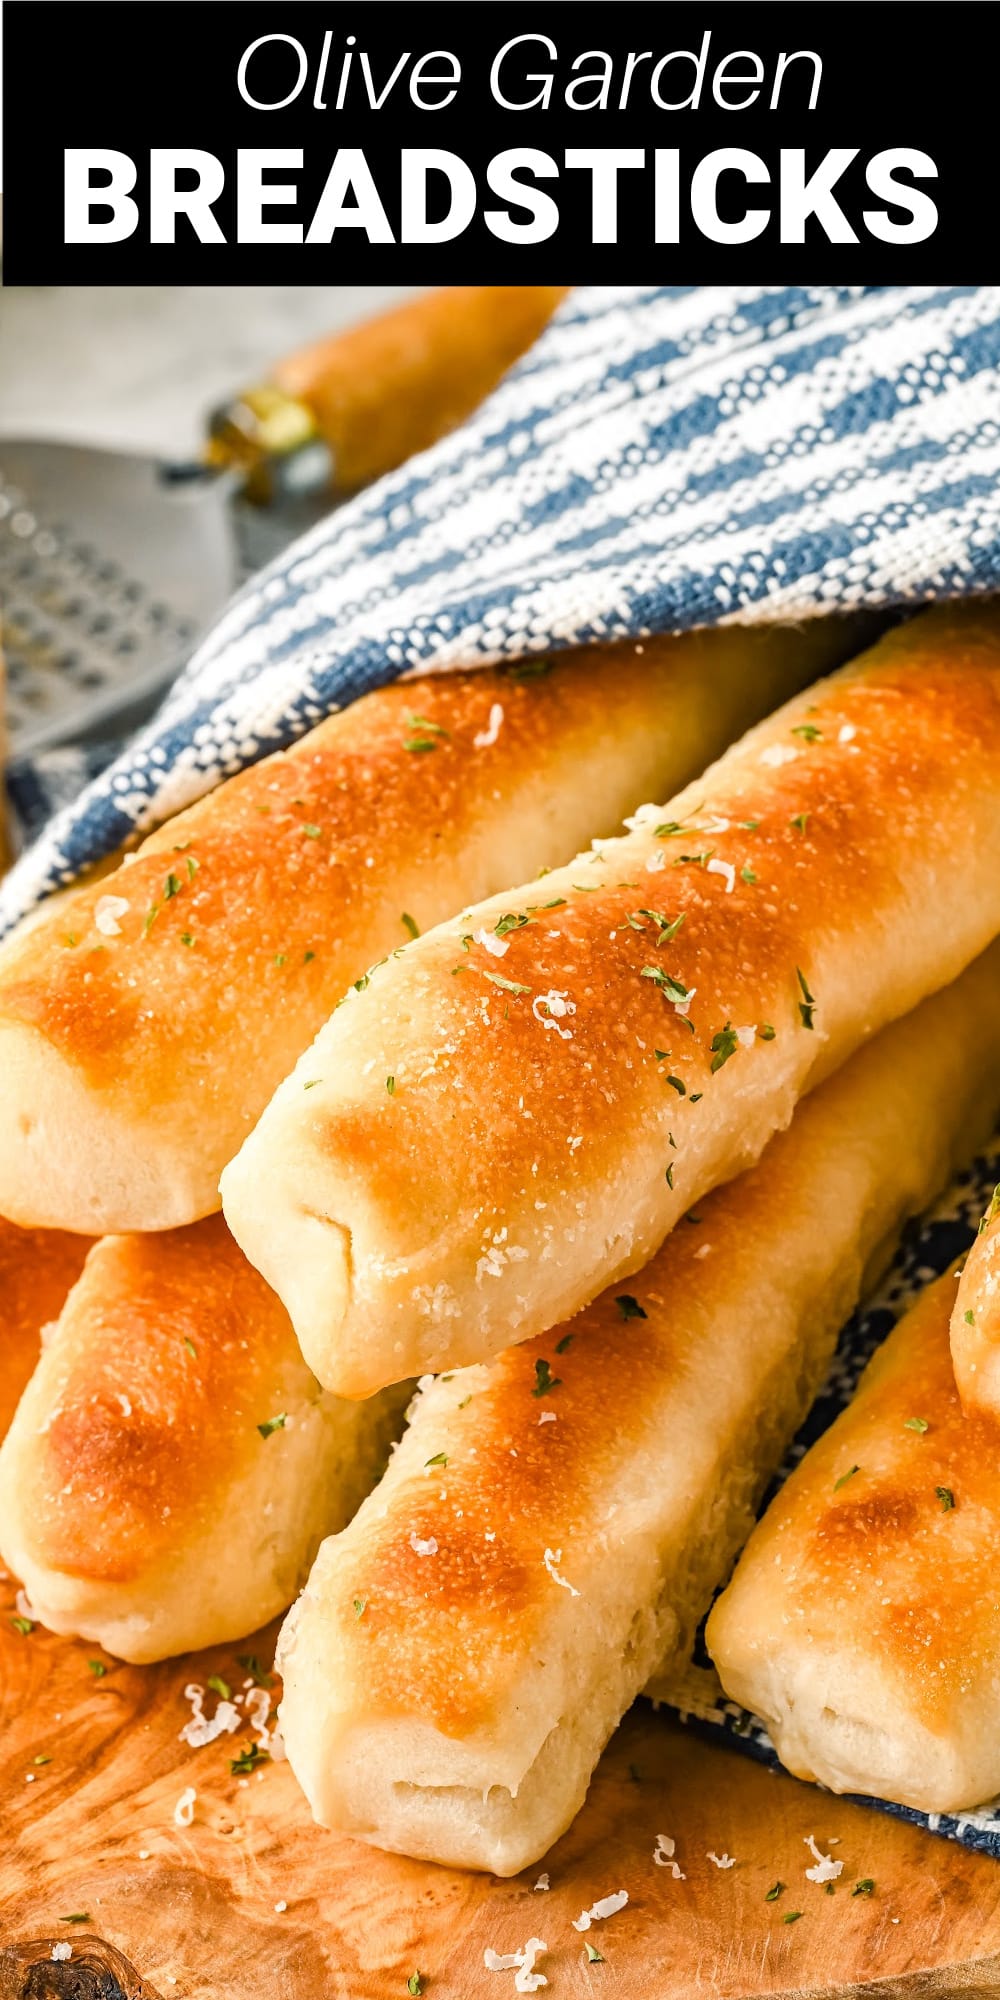 These easy to make Copycat Olive Garden Breadsticks are melt-in-your-mouth delicious. They’re soft and fluffy, yet perfectly chewy with that signature buttery garlic flavor that makes them completely irresistible. 